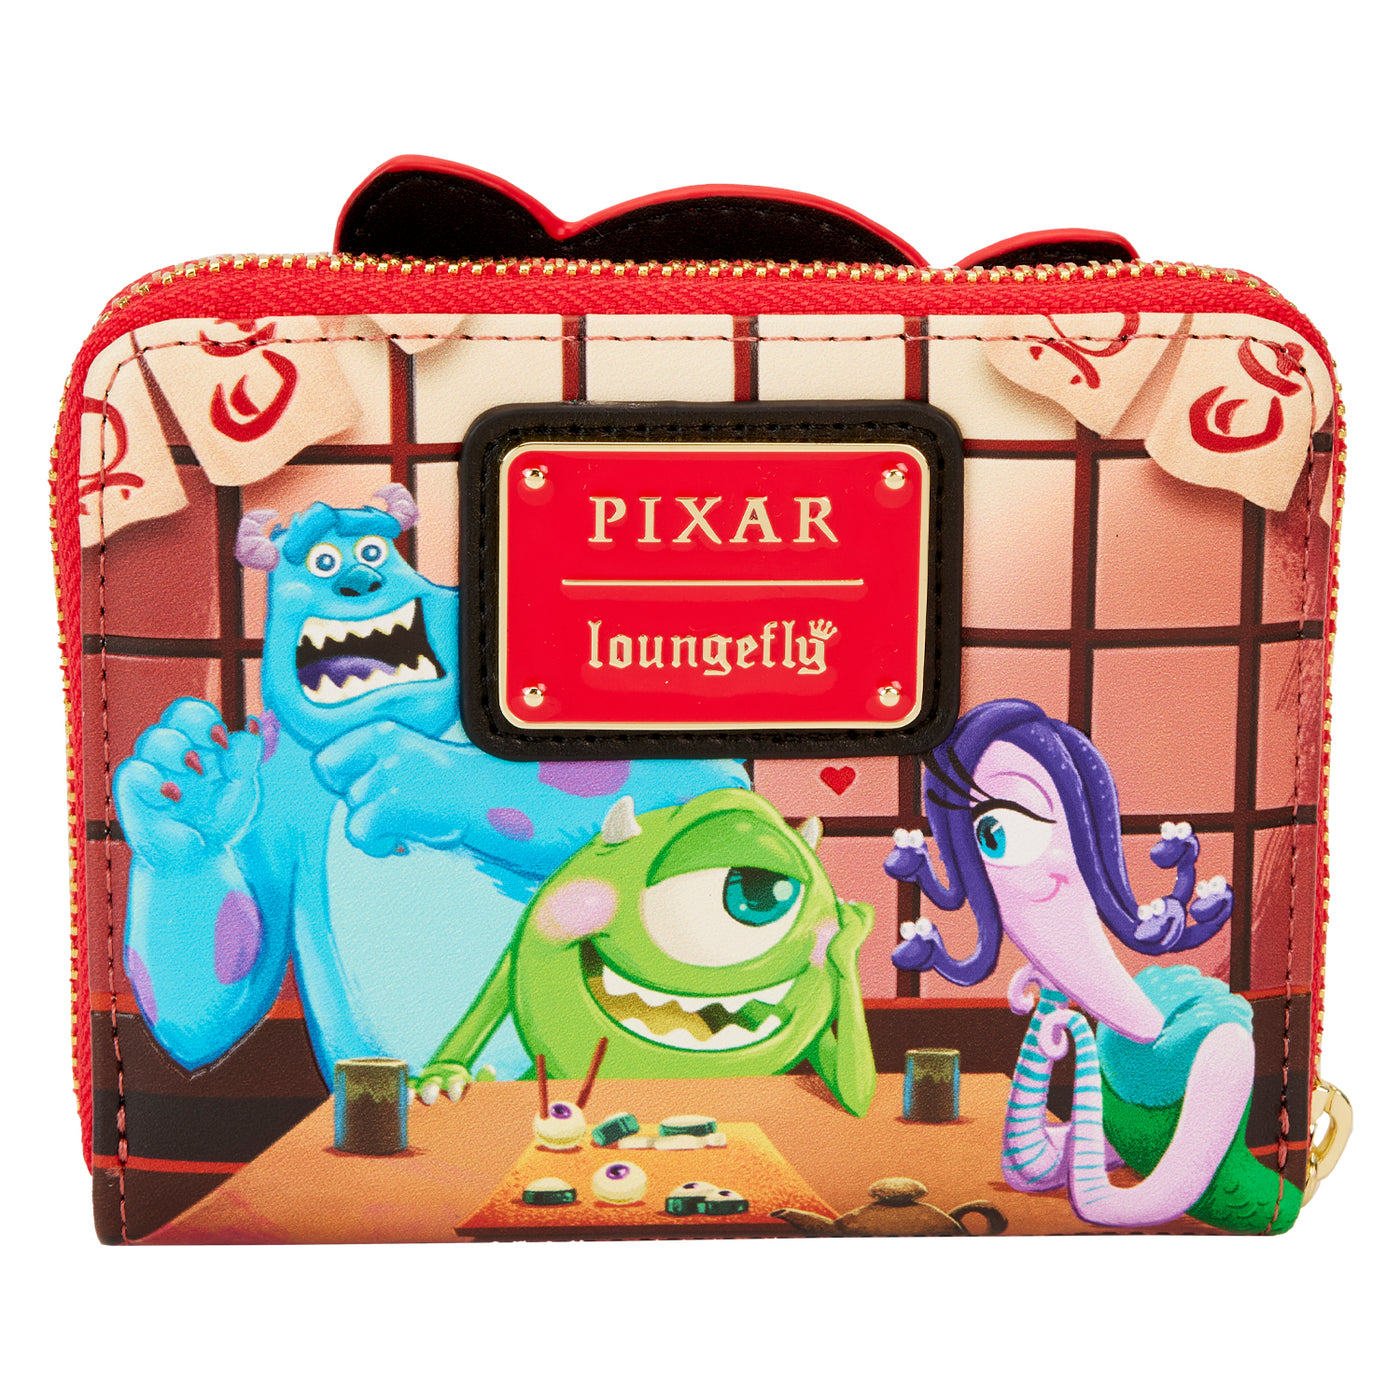 Disney Pixar Monsters Inc. Boo Takeout Wallet